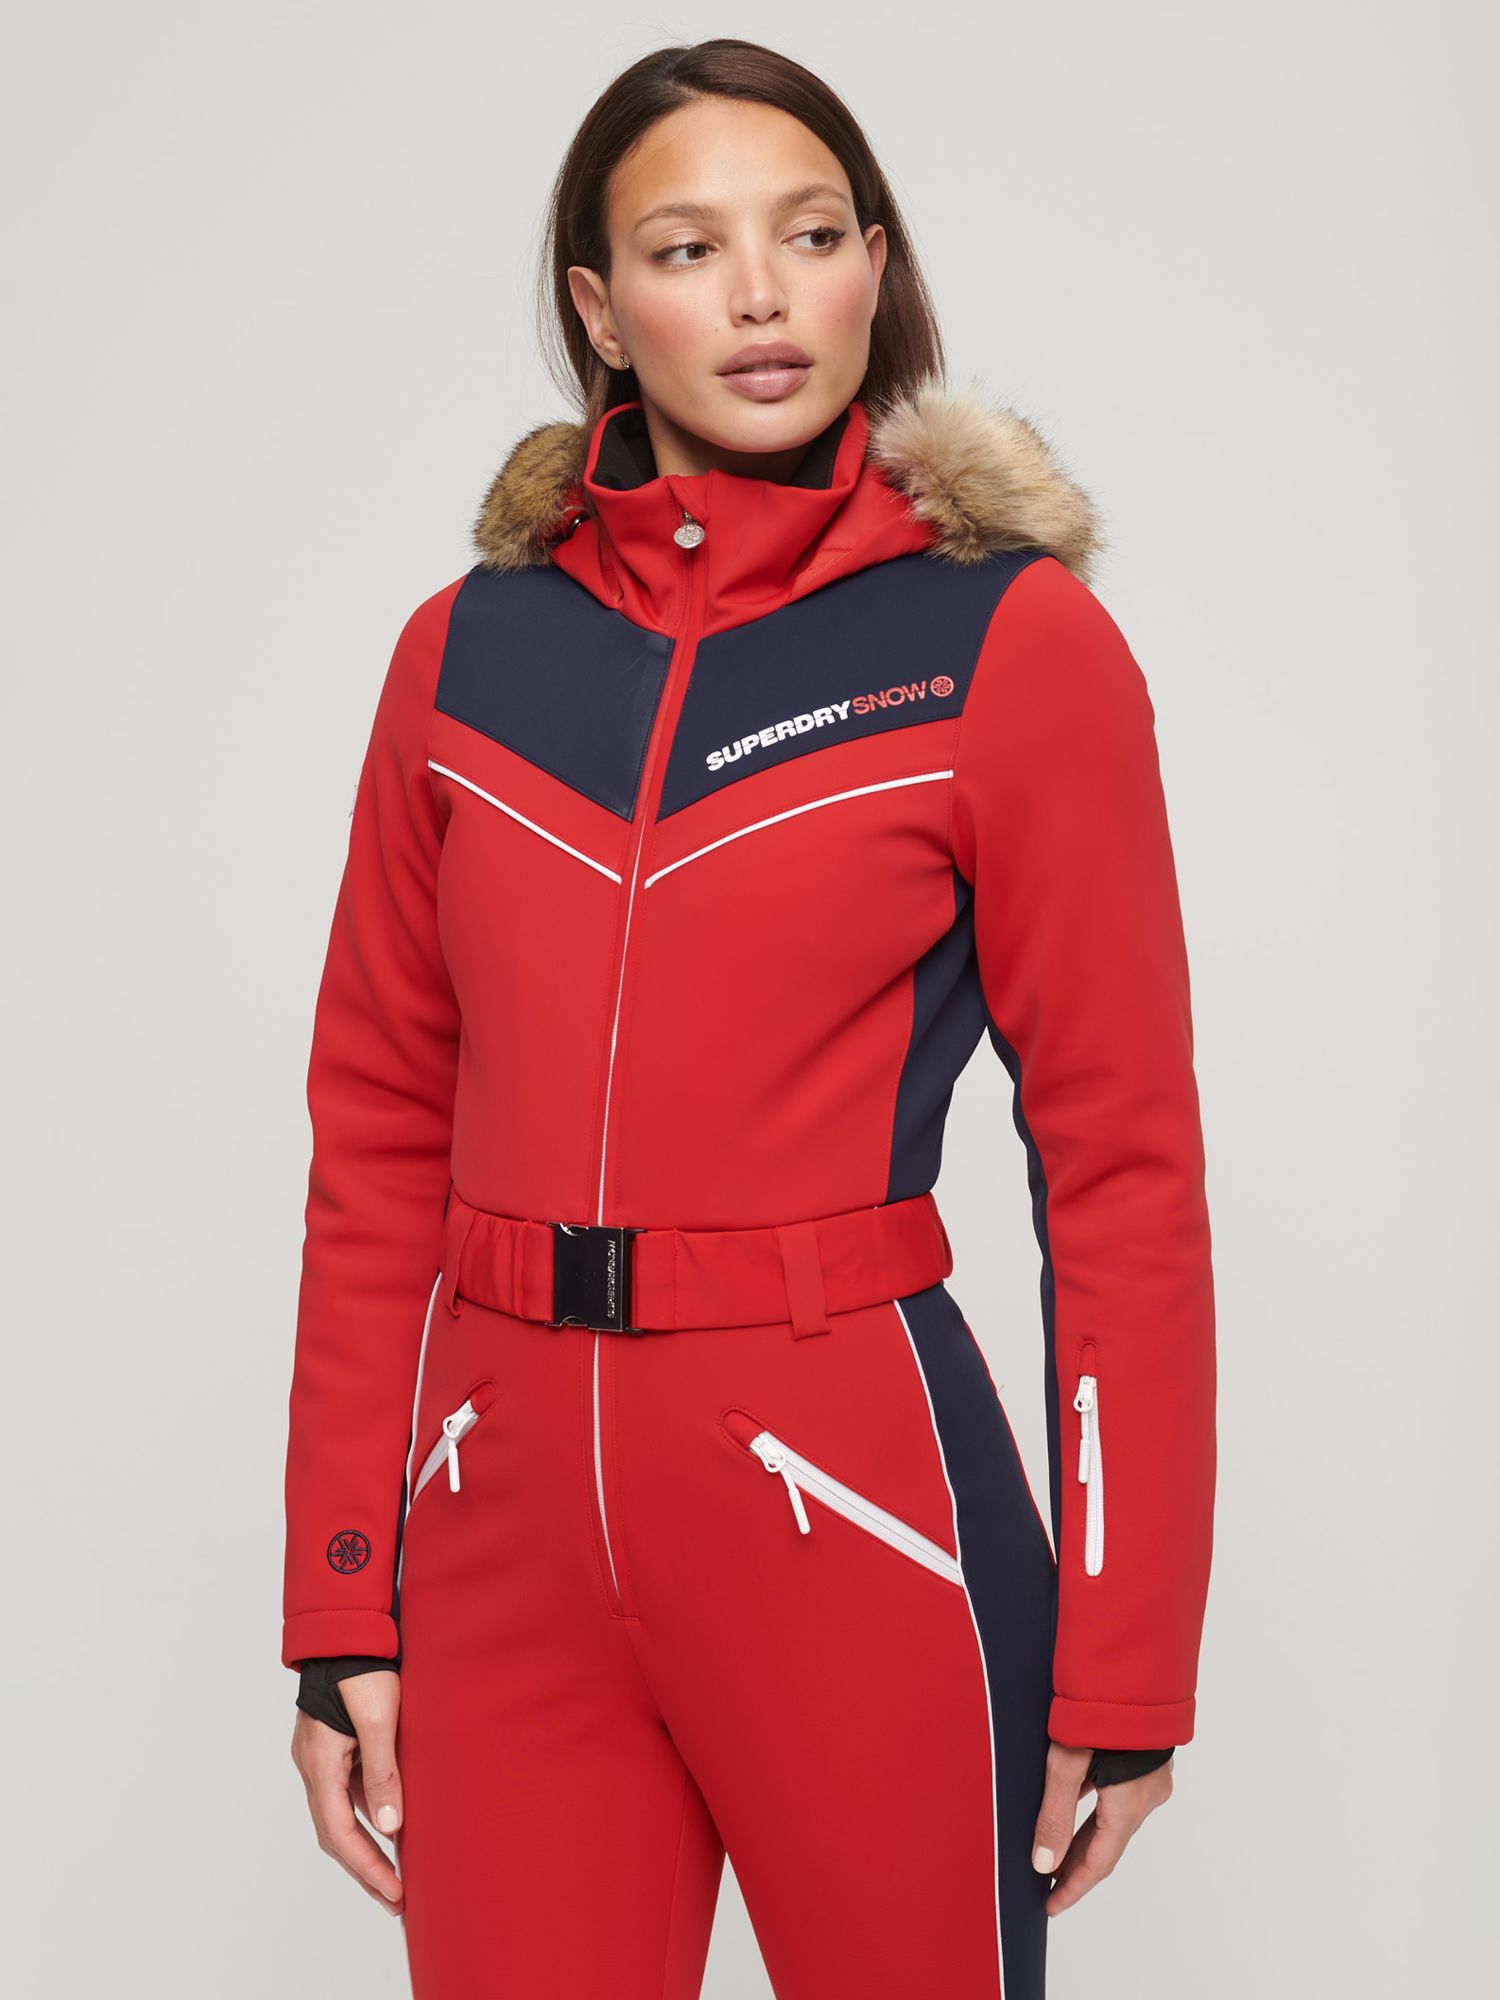 Superdry Women's Ski Suit, Hike Red, 10